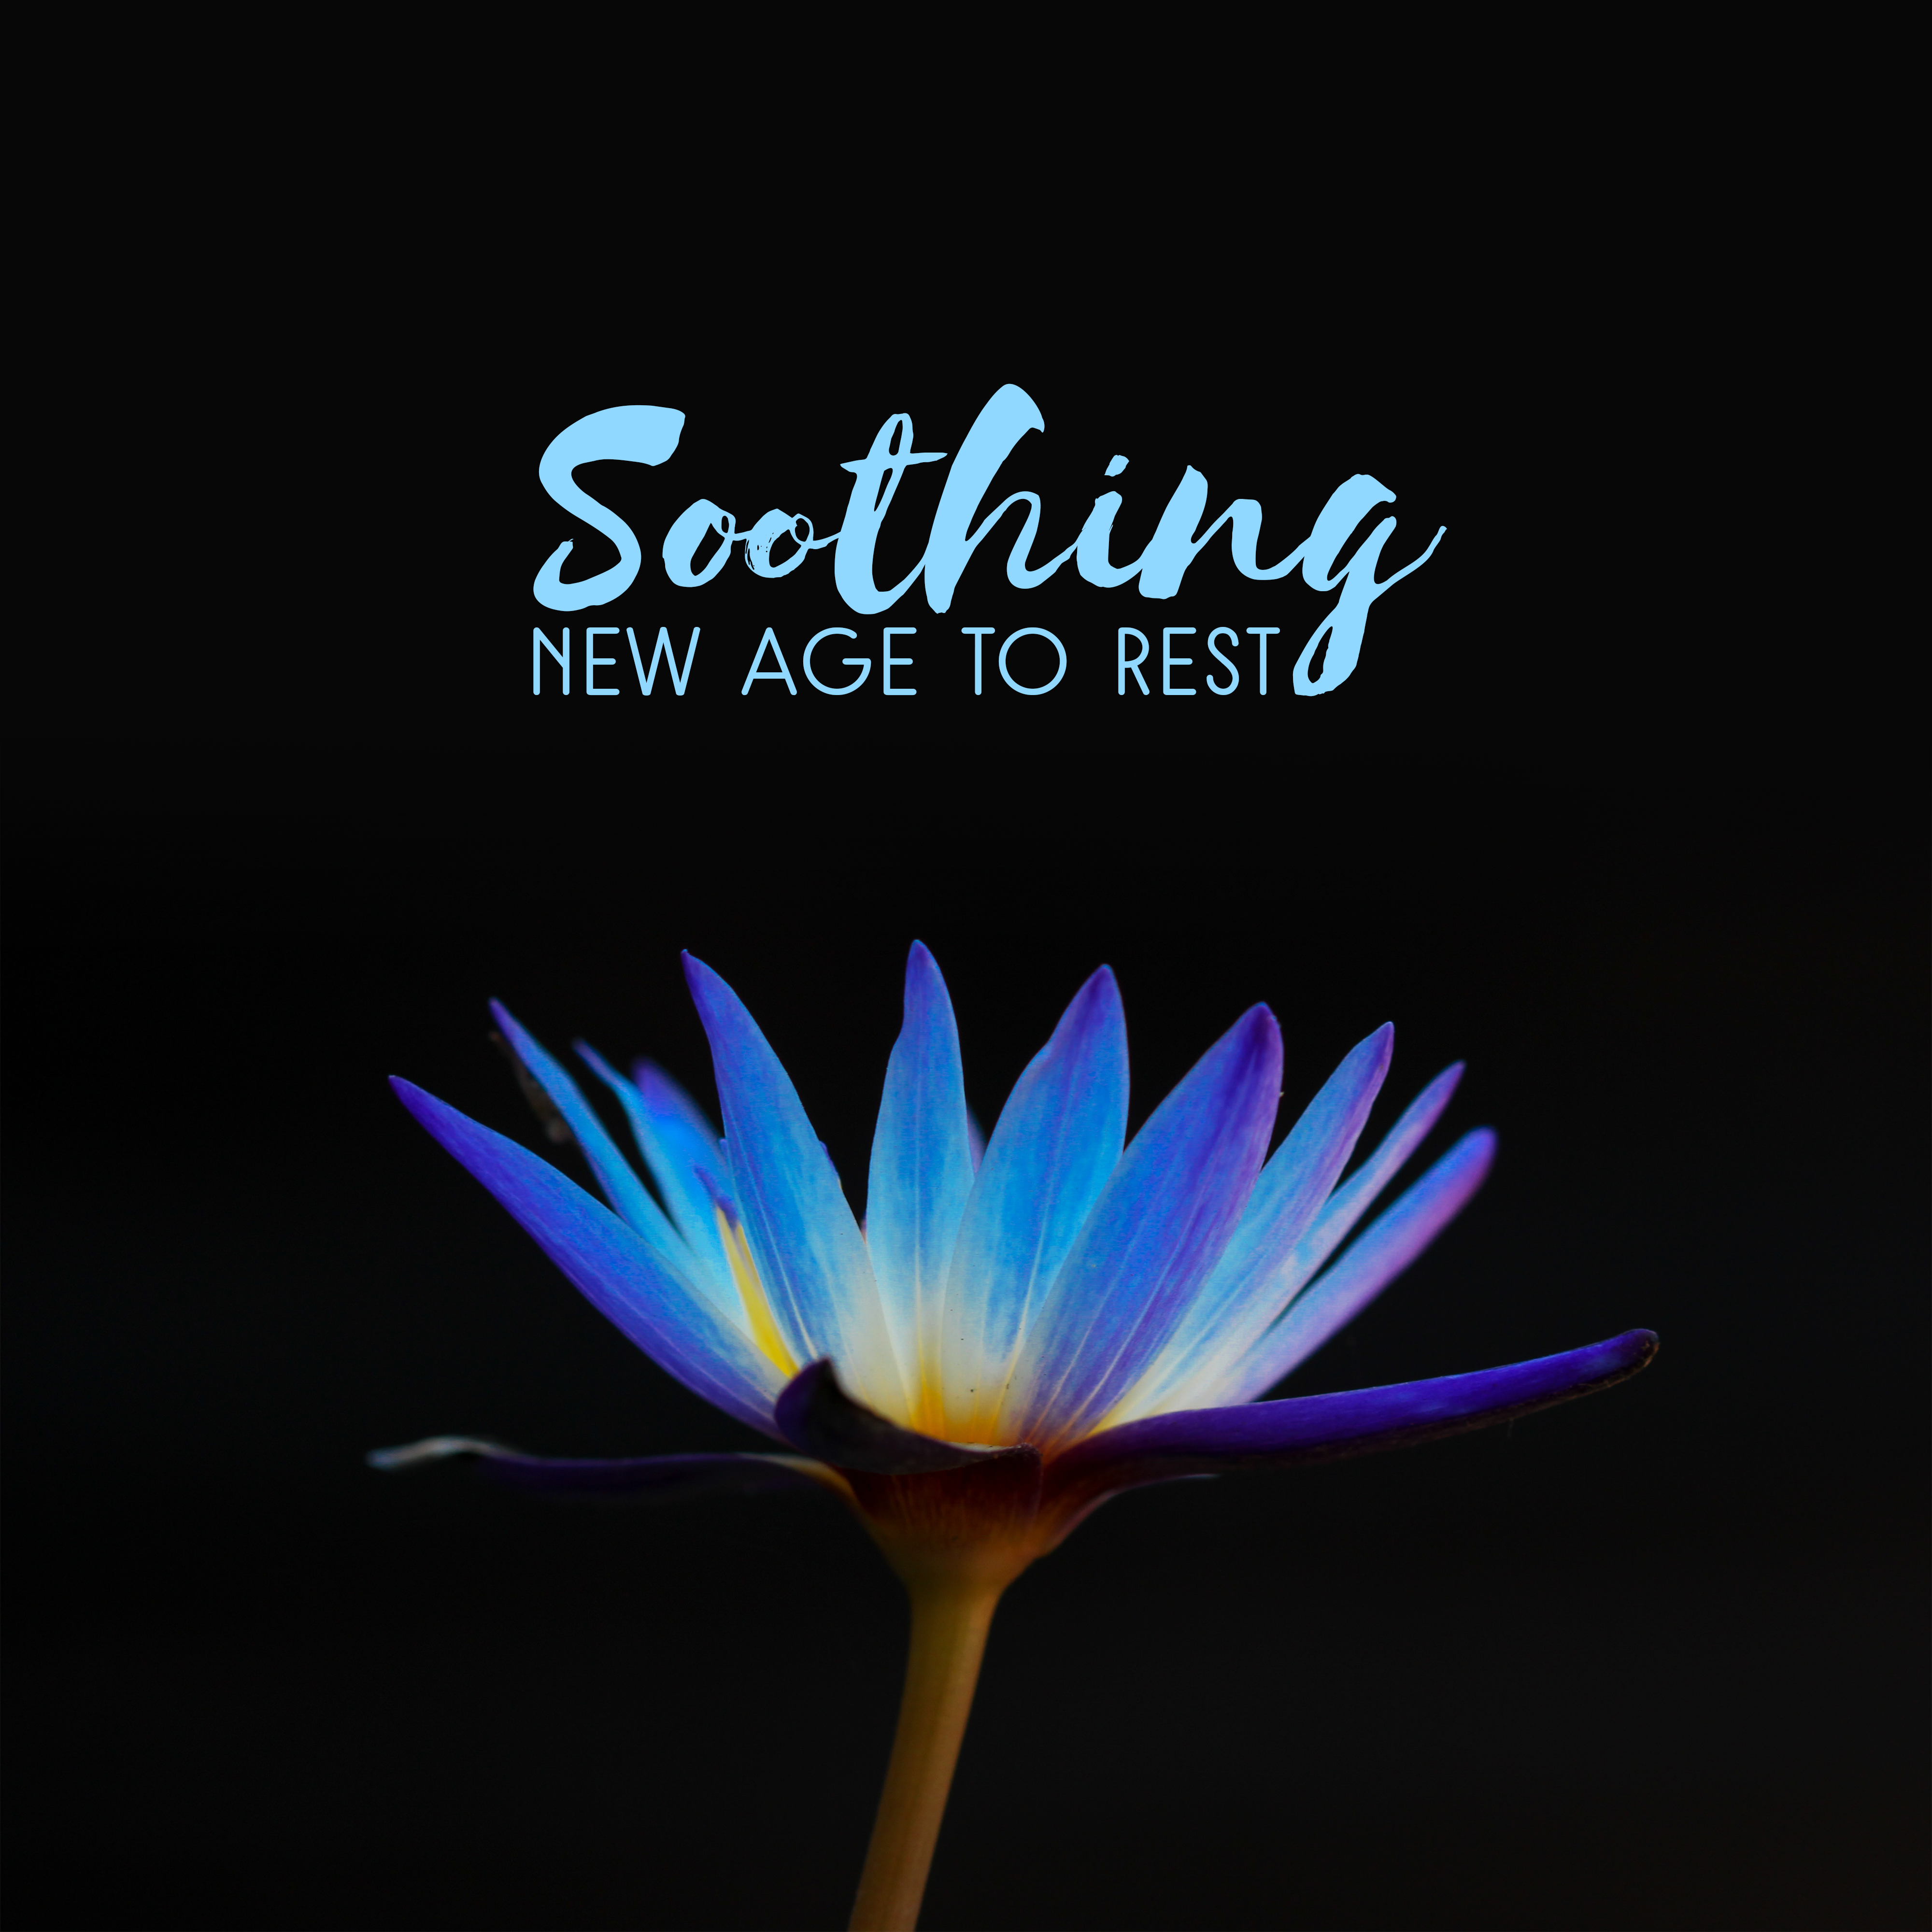 Soothing New Age to Rest